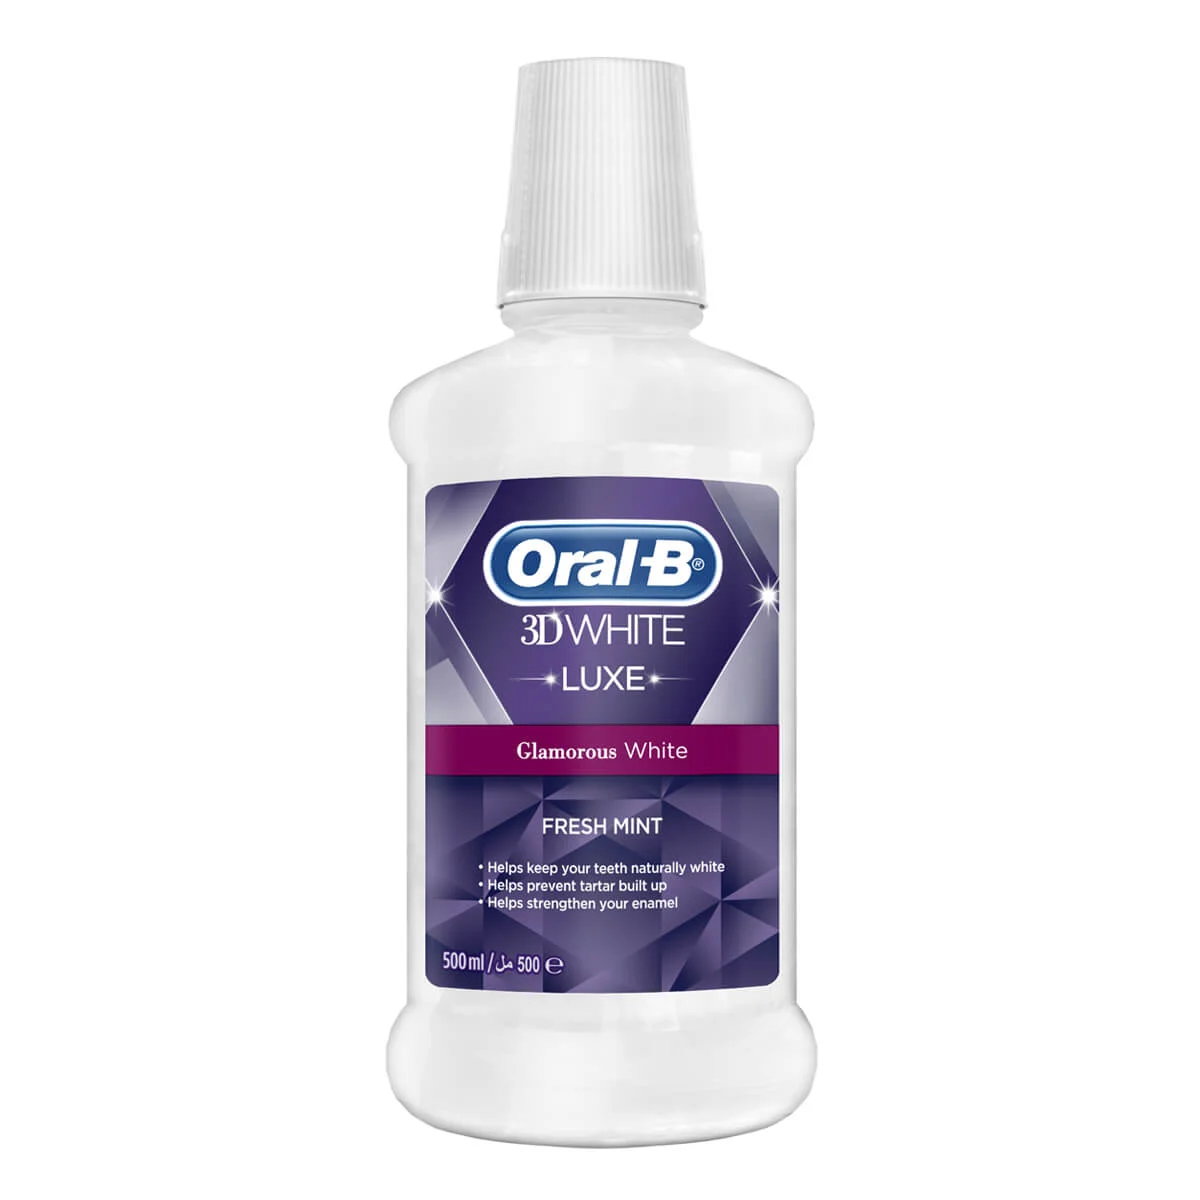 Oral-B 3D White Luxe Mouthwash undefined